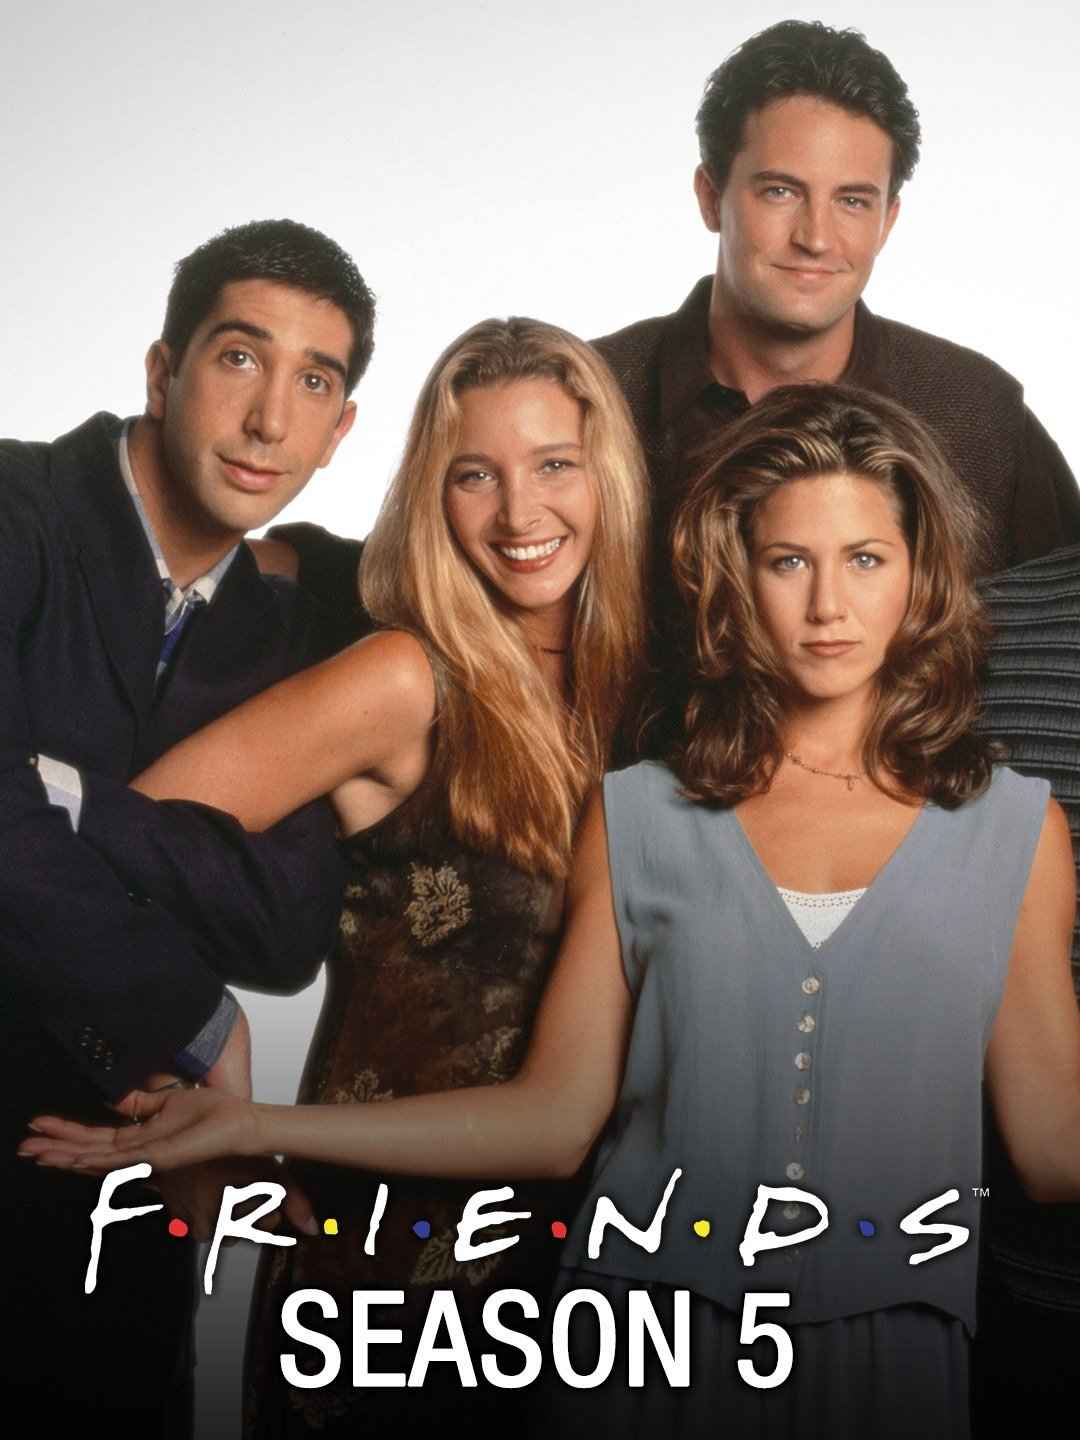 where can i see friends series